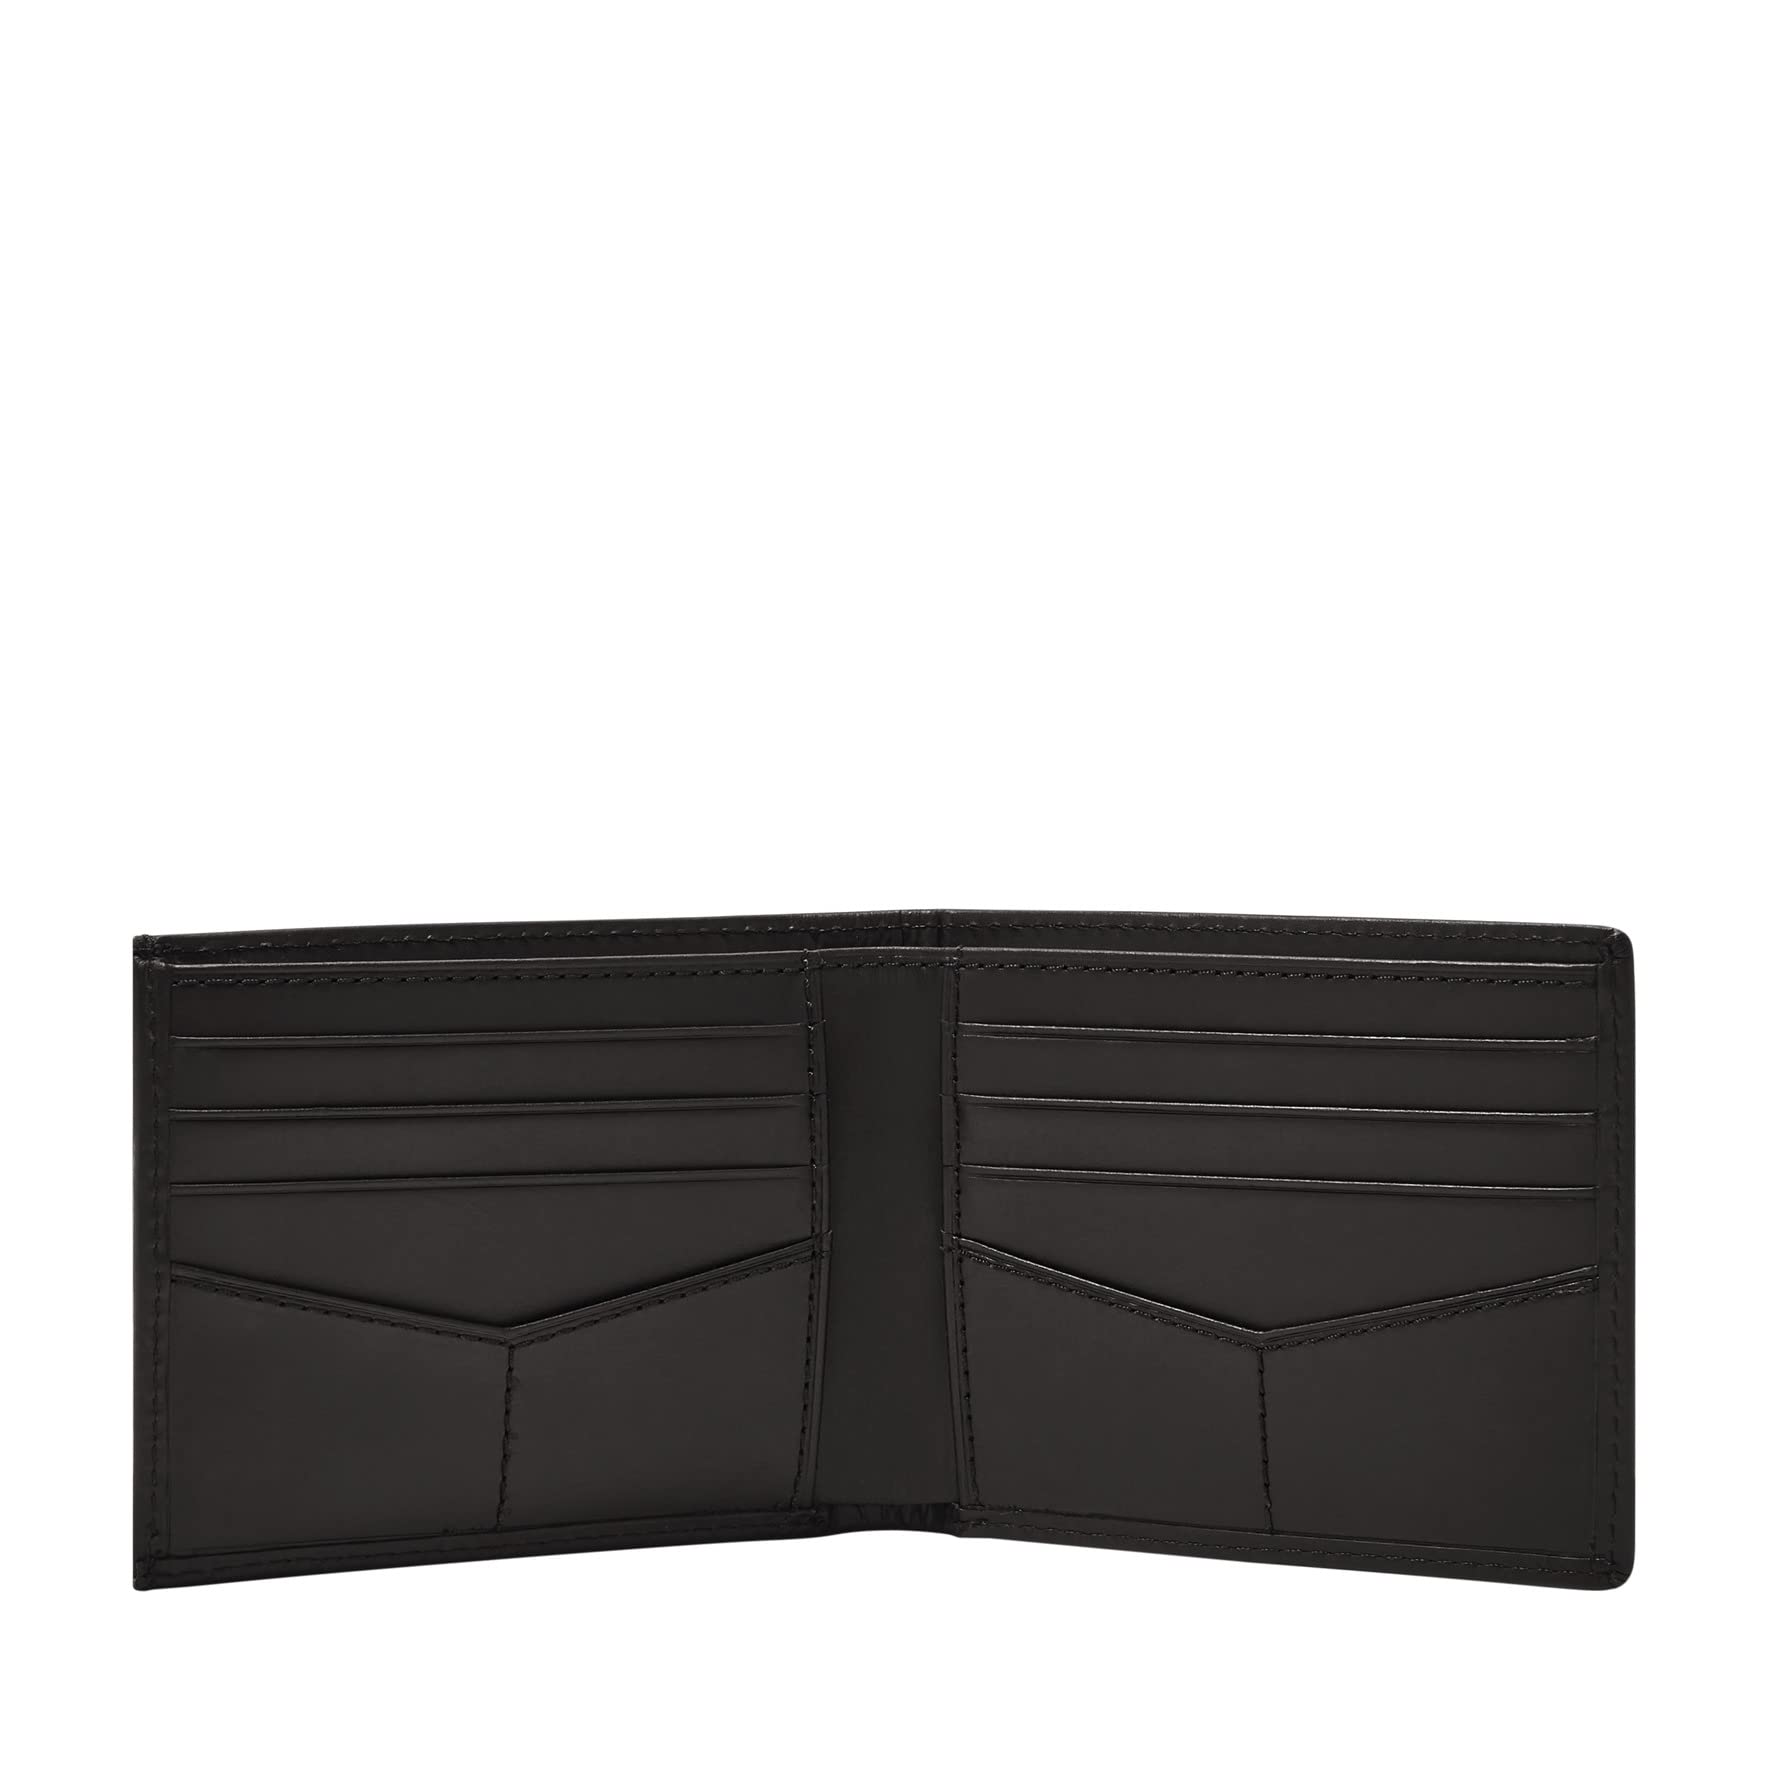 Fossil Men's Leather Bifold Sliding 2-in-1 with Removable Card Case Wallet